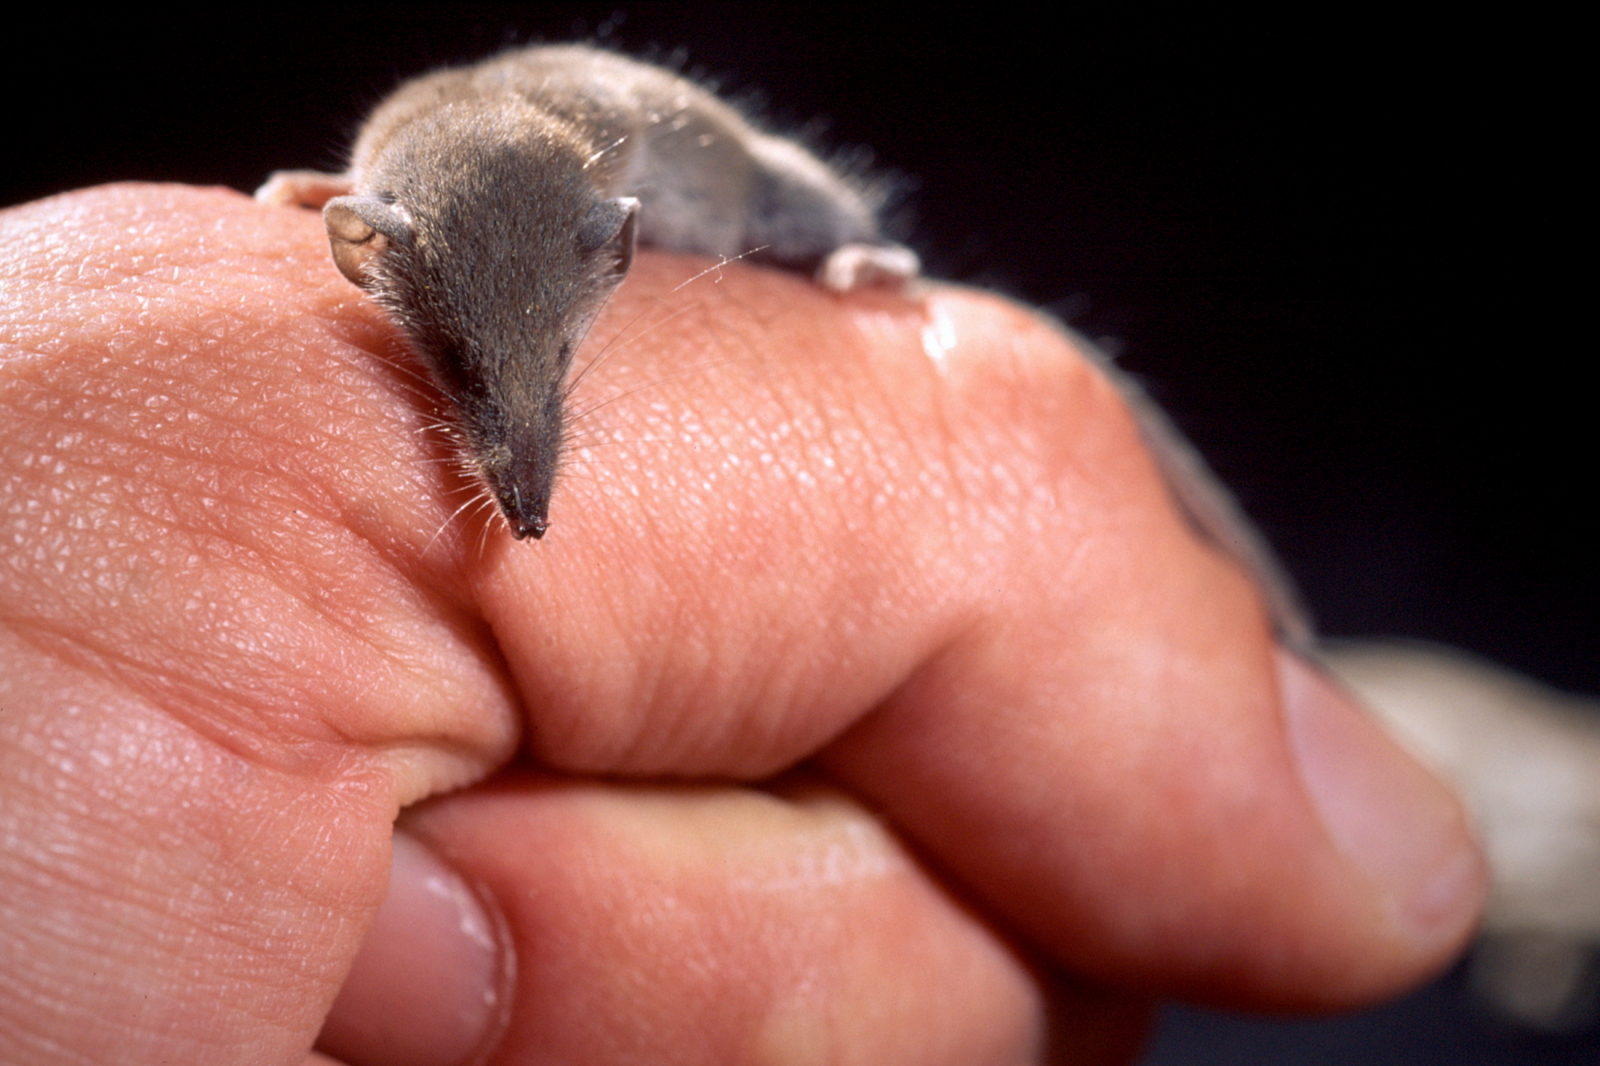 What is the tiniest mammal in the world?